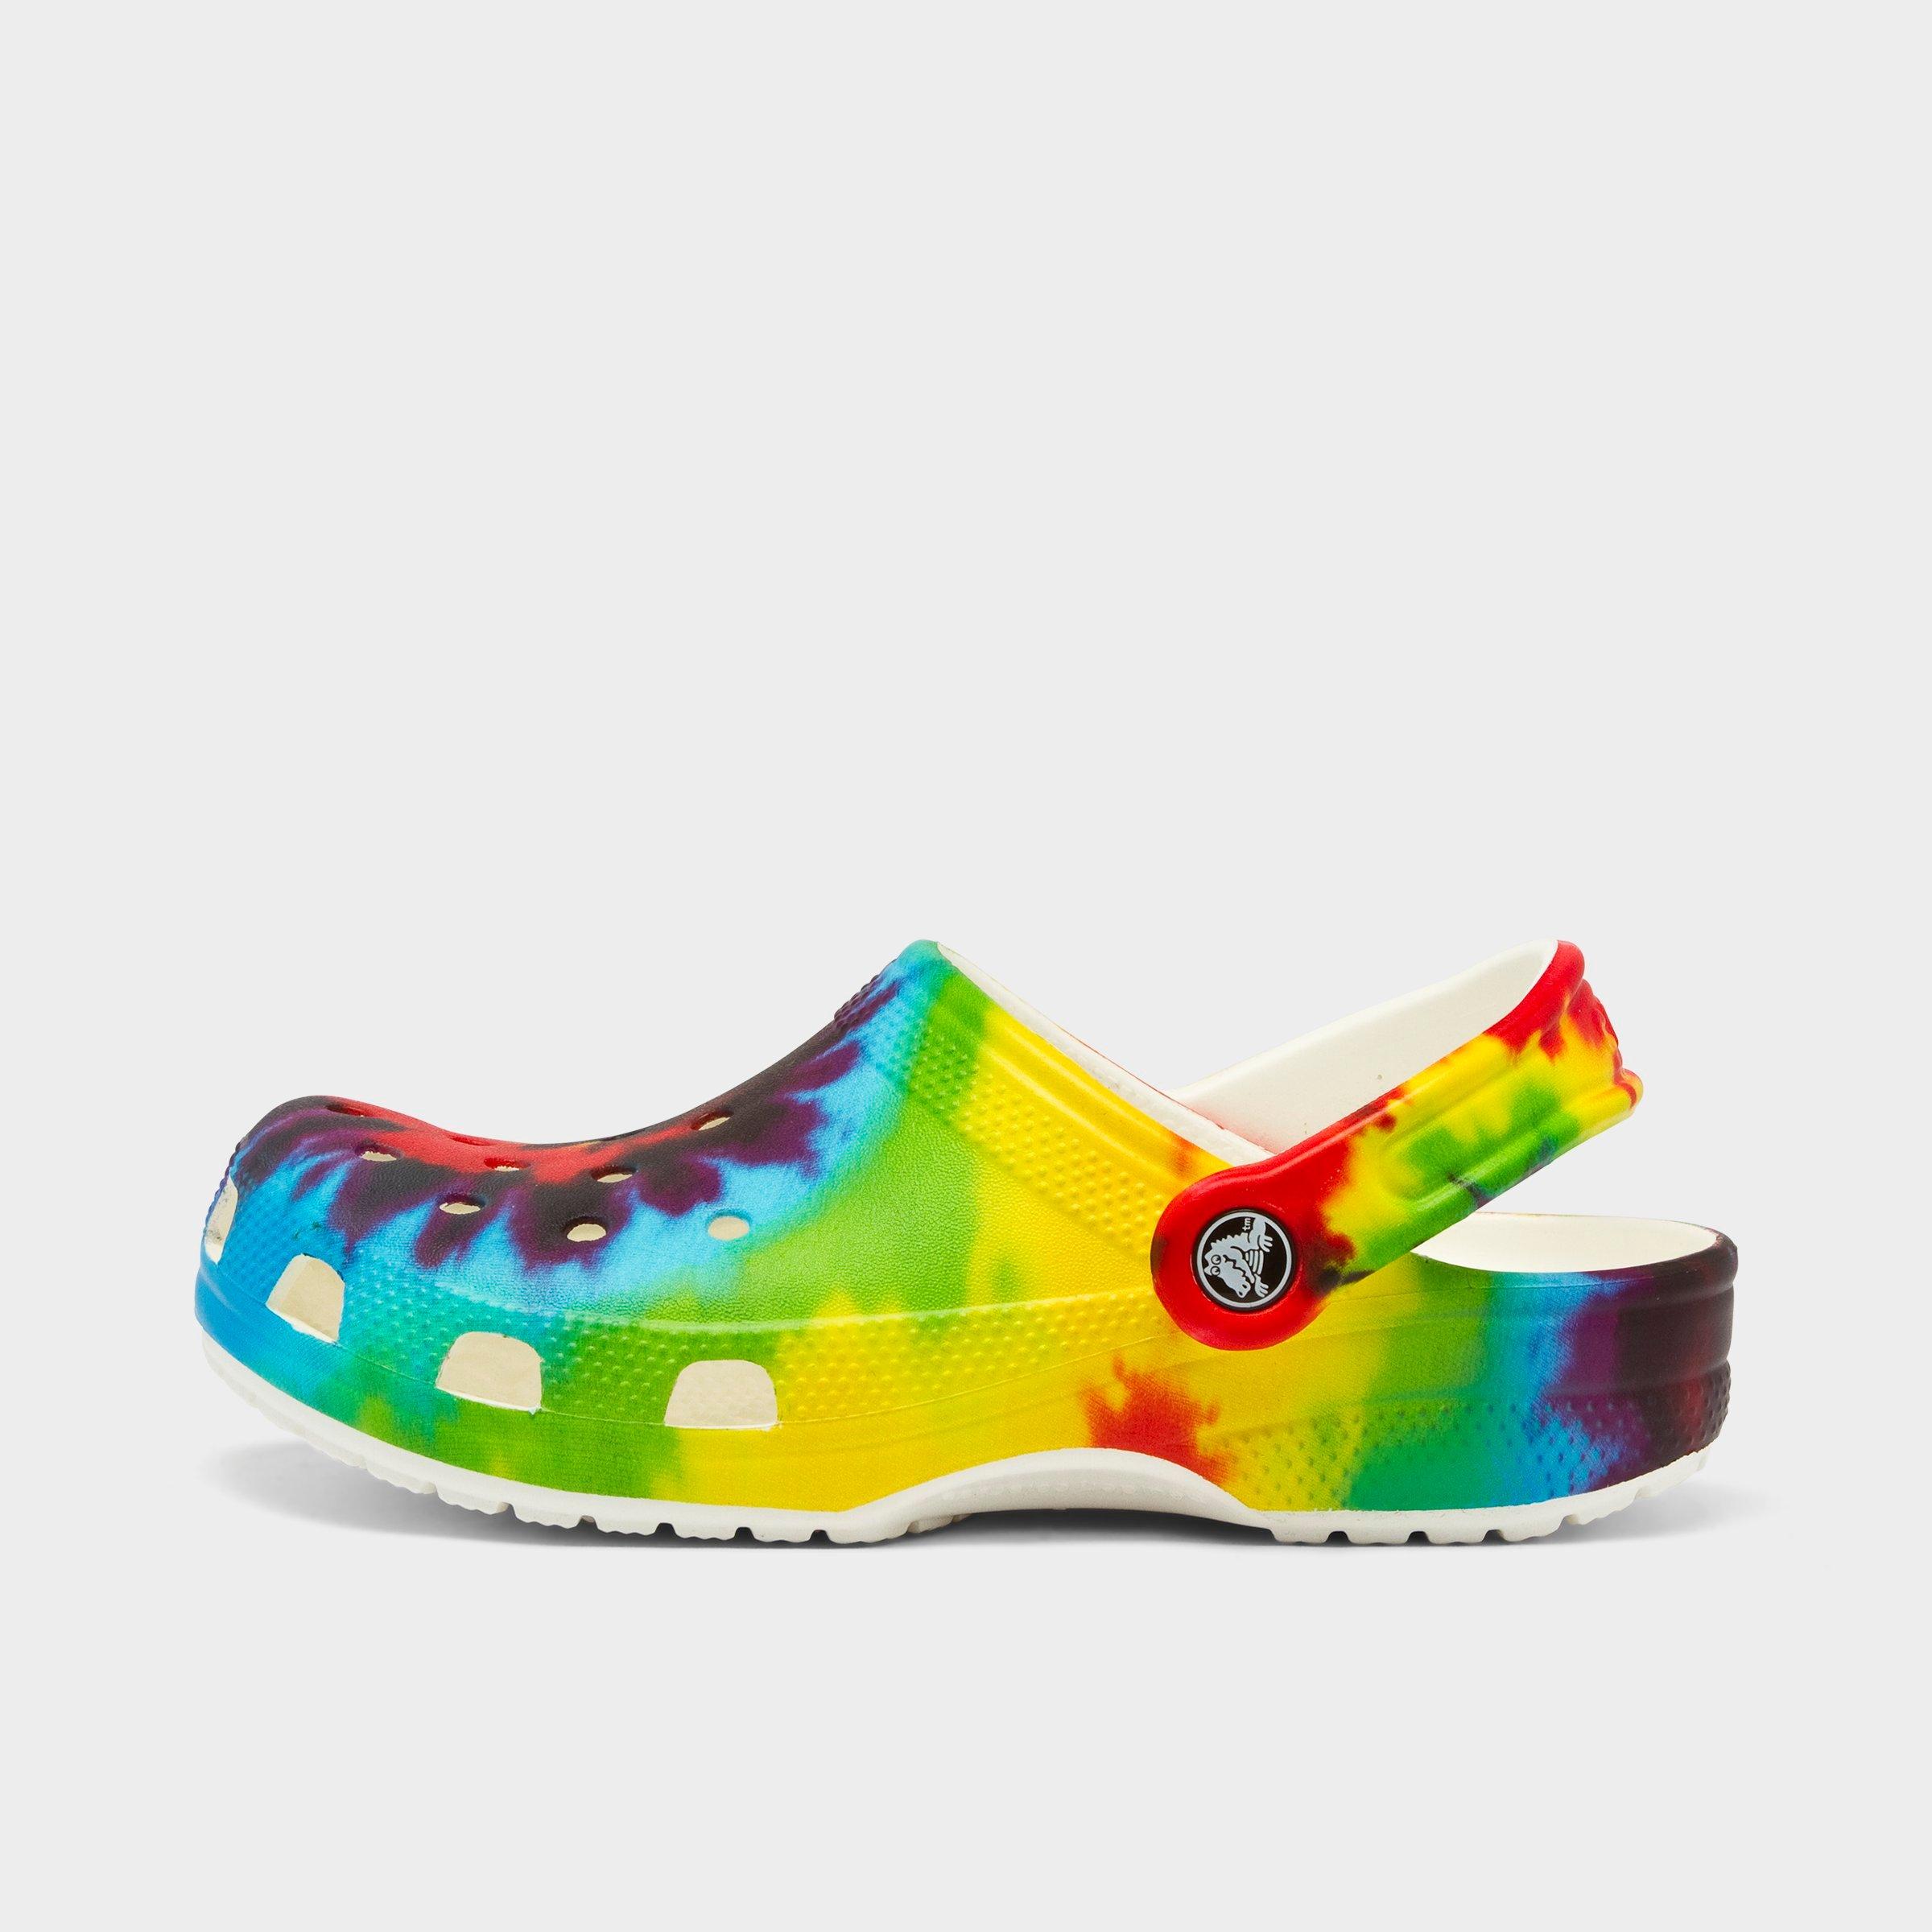 white crocs with colorful words